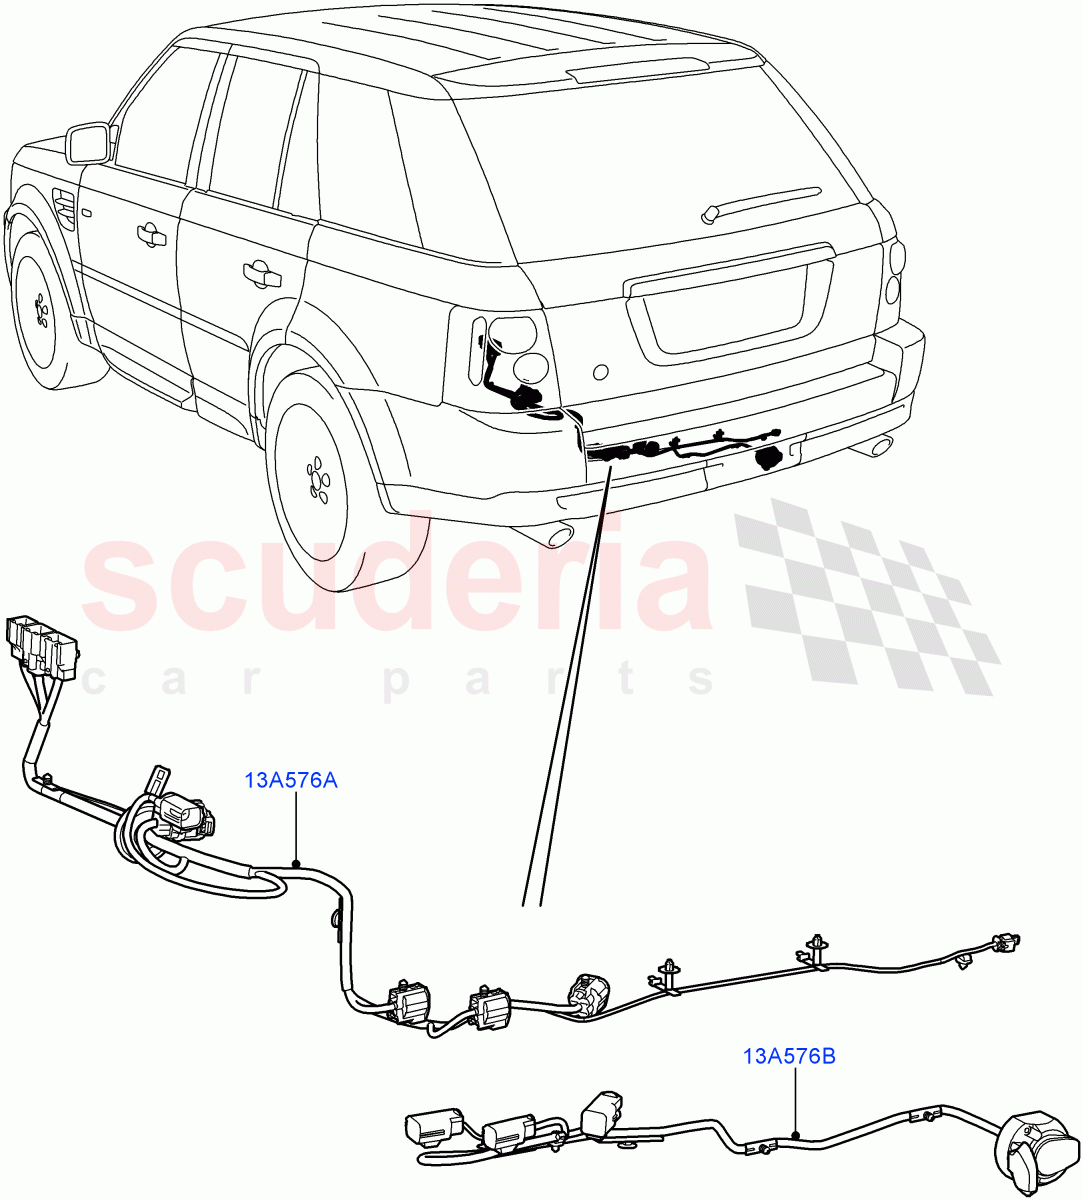 Electrical Wiring - Body And Rear(Towing)((V)FROMAA000001) of Land Rover Land Rover Range Rover Sport (2010-2013) [5.0 OHC SGDI SC V8 Petrol]